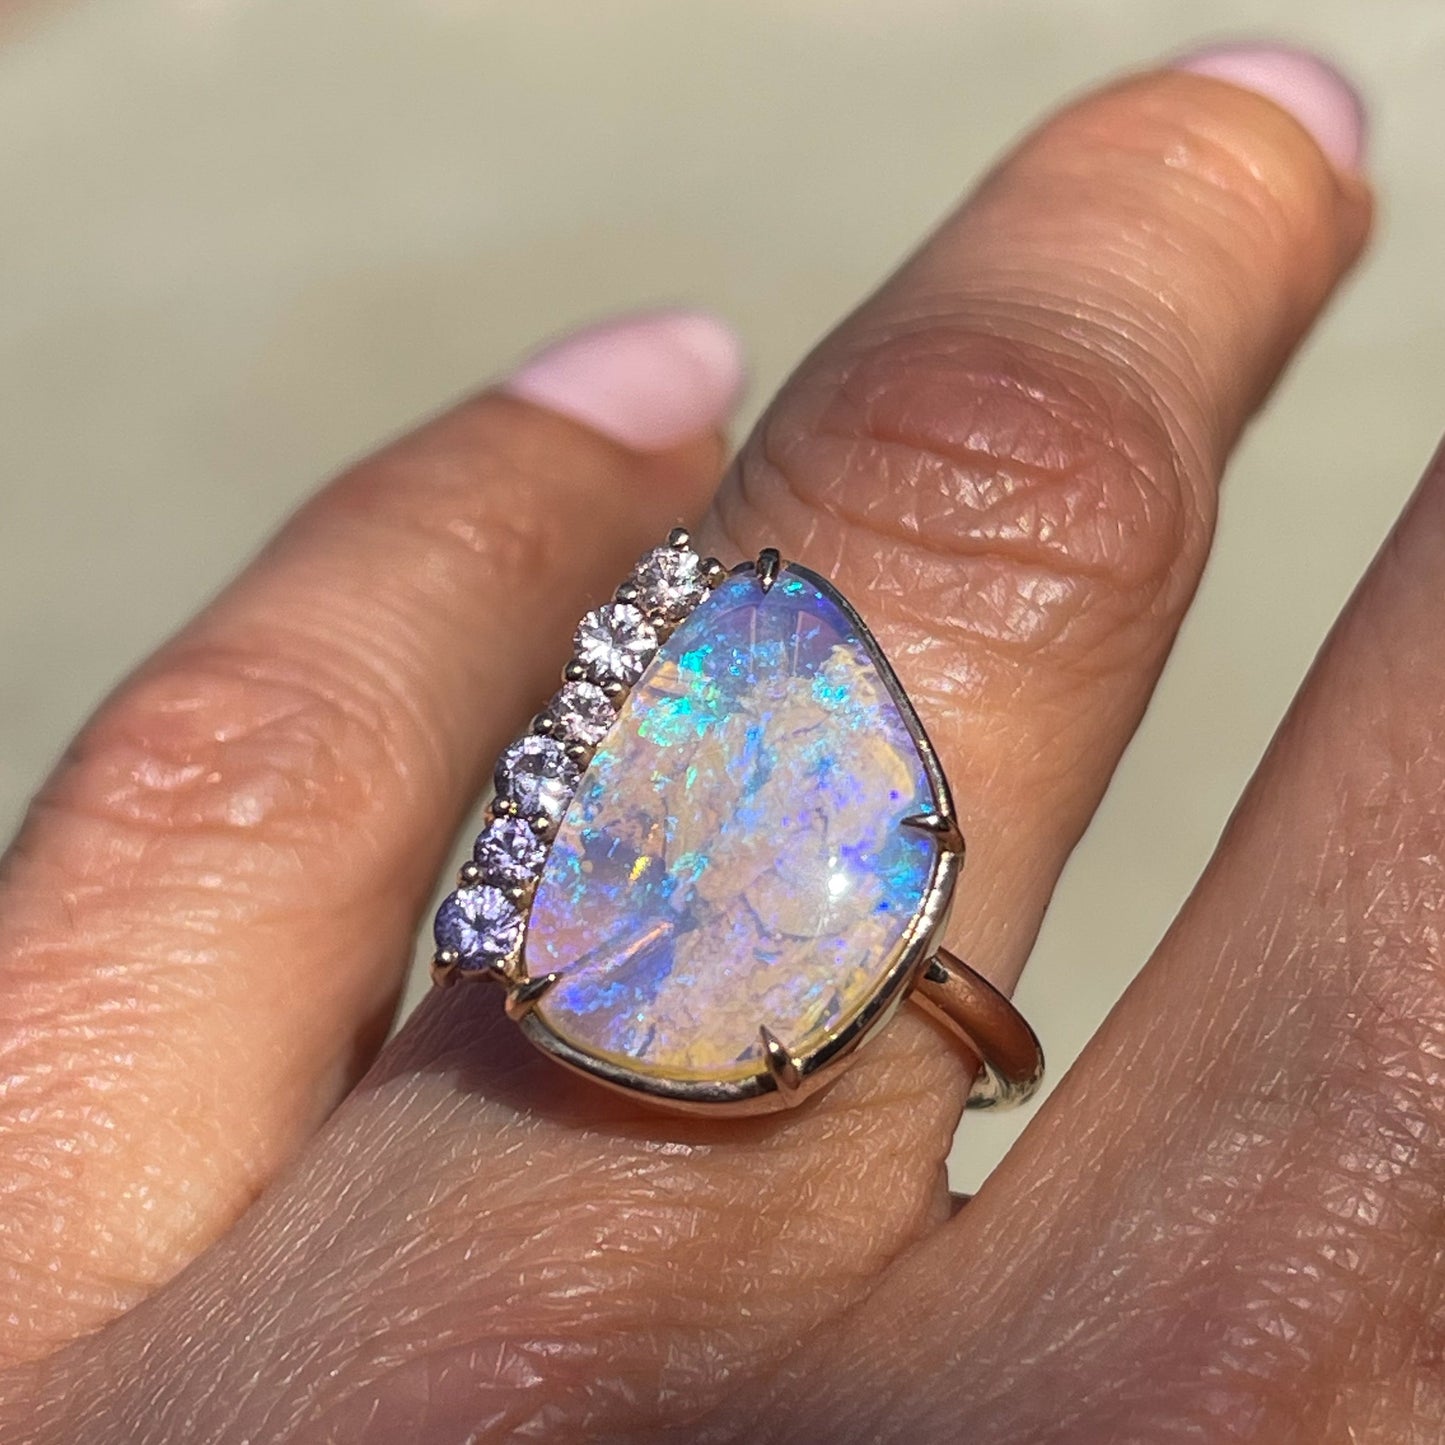 An Australian Opal Ring by NIXIN Jewelry modeled on a hand. The rose gold opal ring is a beautiful example of unique opal jewelry.